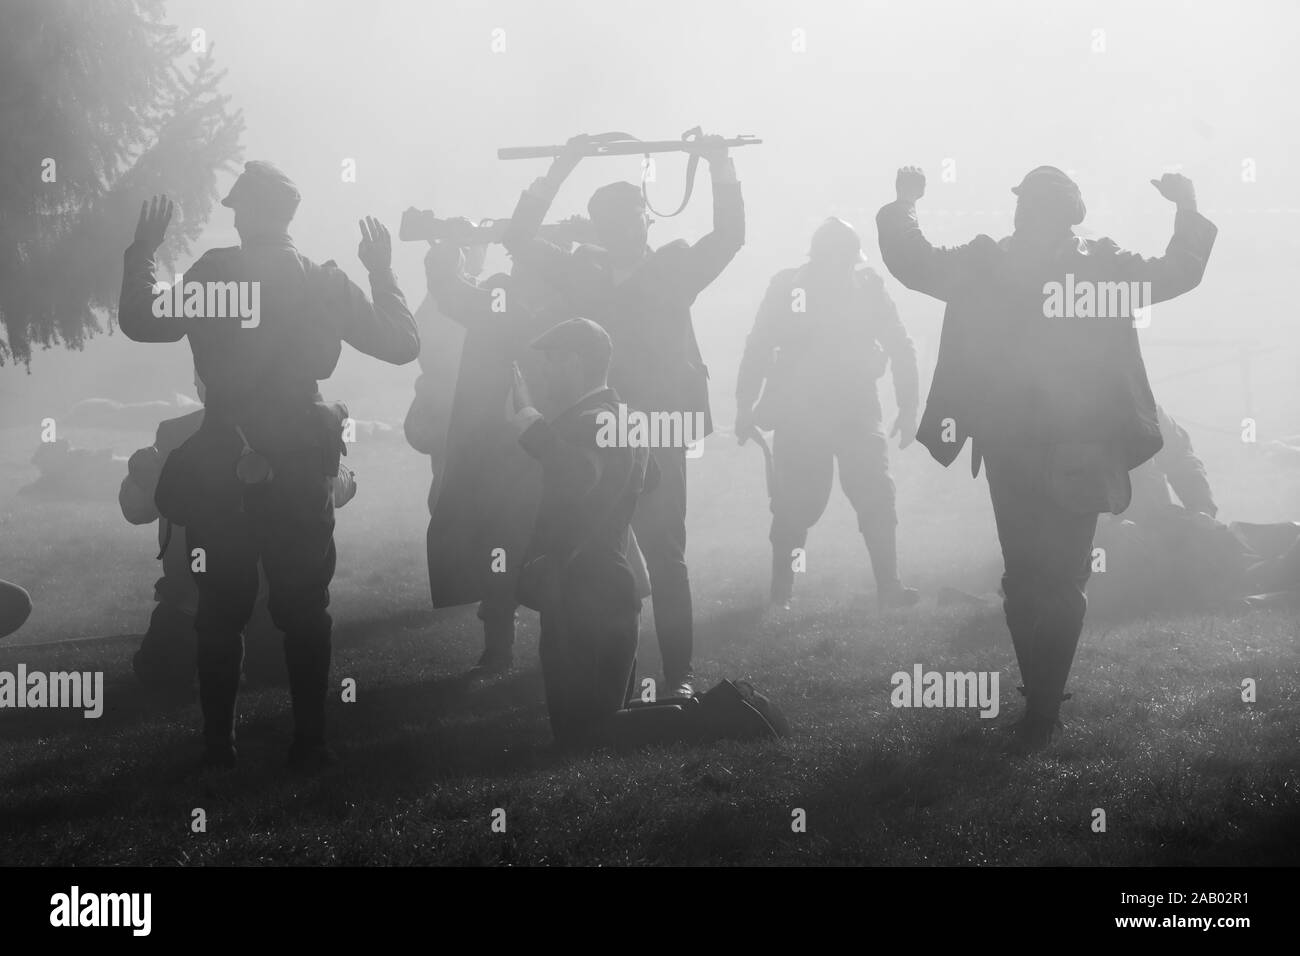 Silhouettes of Soldiers in uniforms during War with rifles on battlefield. All area is in smoke and sunrays peeking thru. There are hostages in the Stock Photo